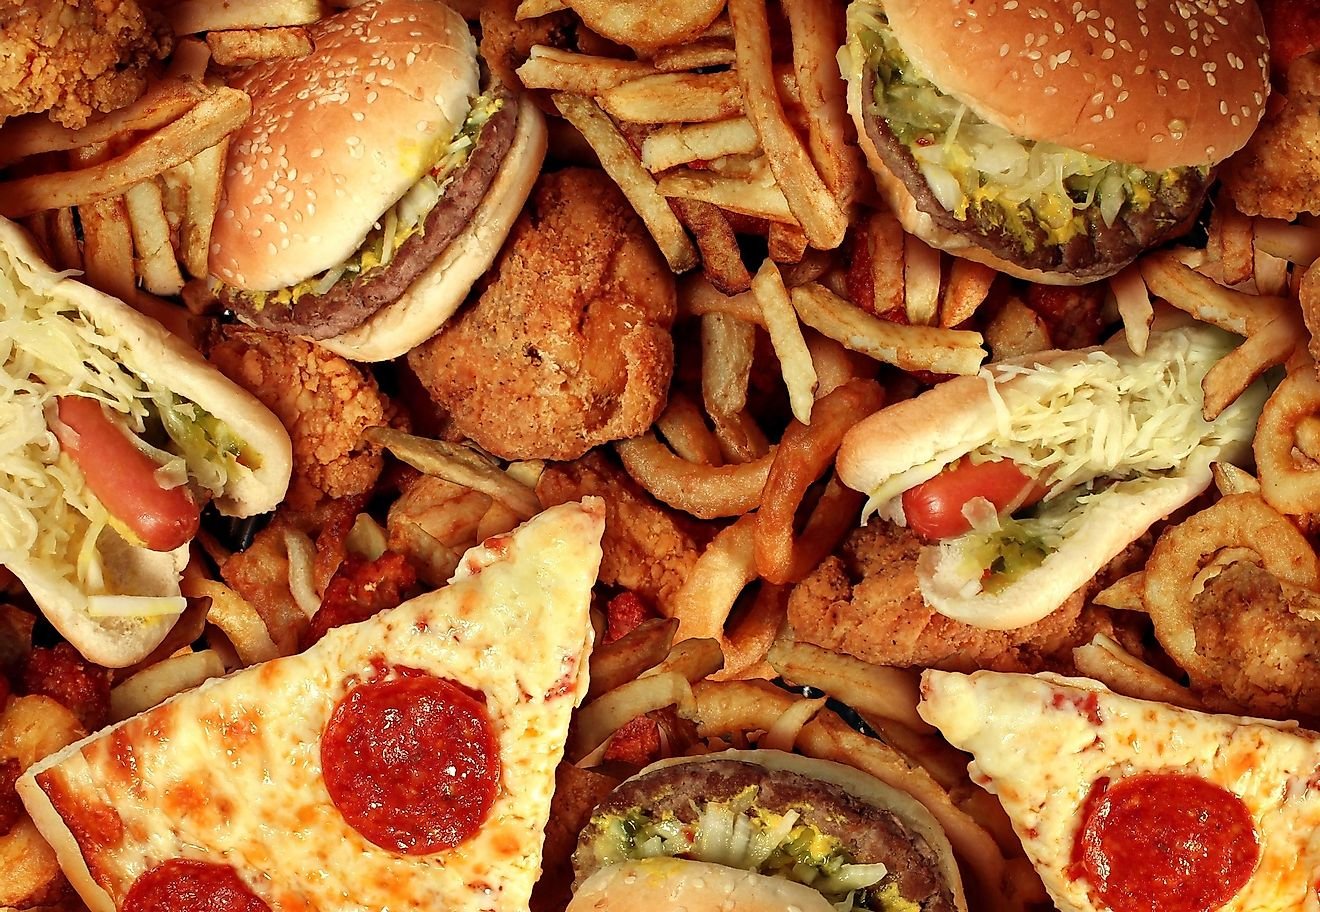 The 20 Unhealthiest Cities In The US